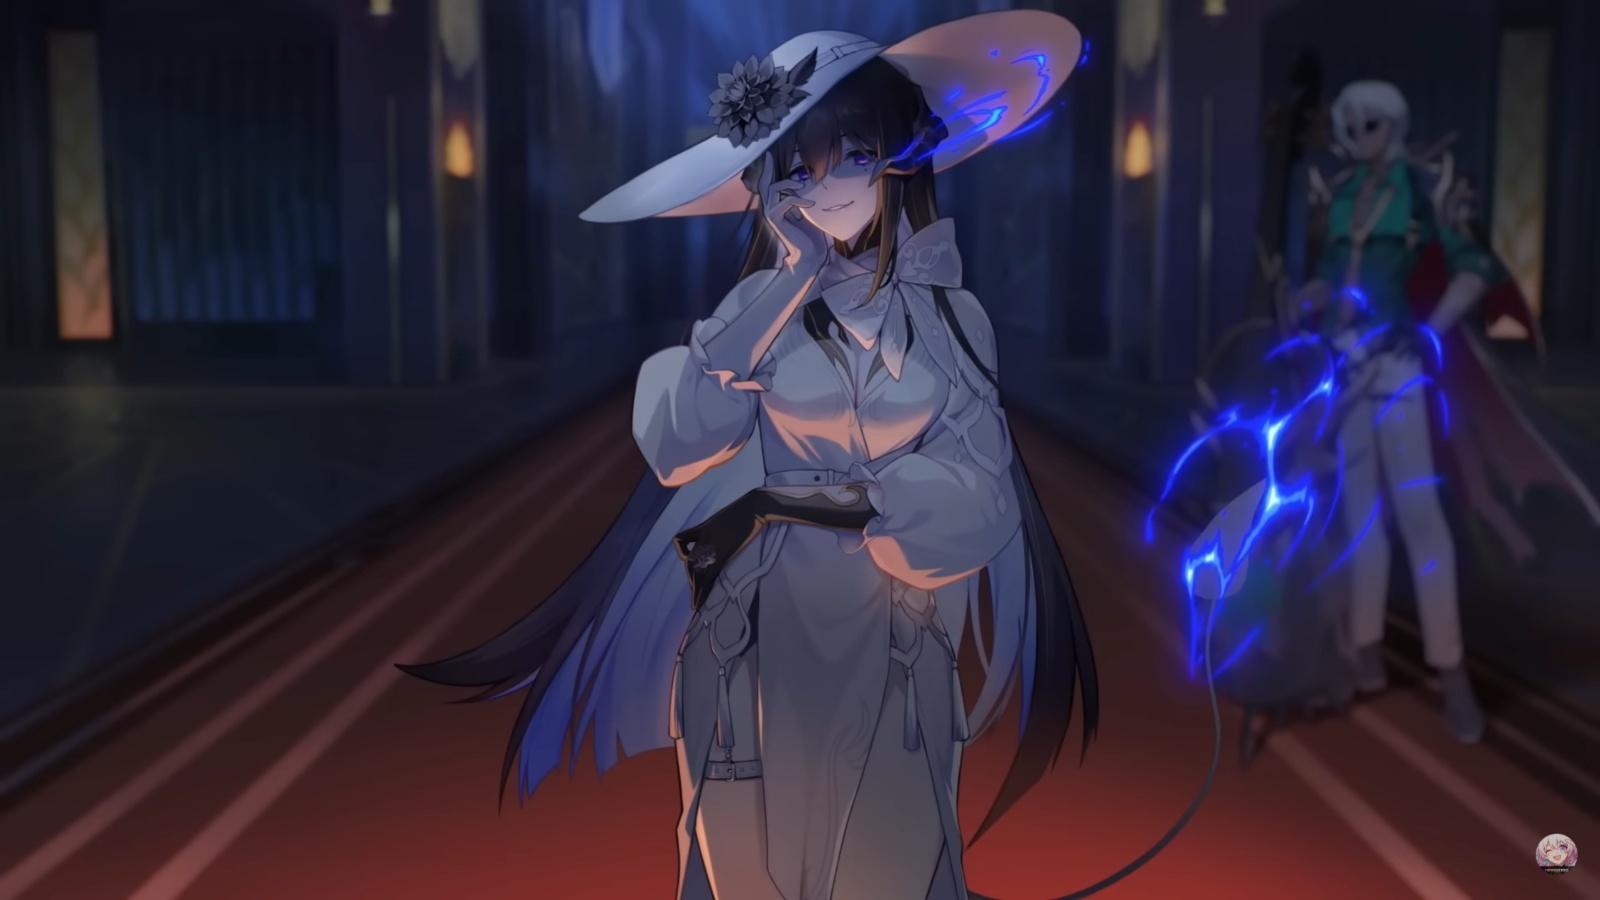 A screenshot of Constance from the new trailer